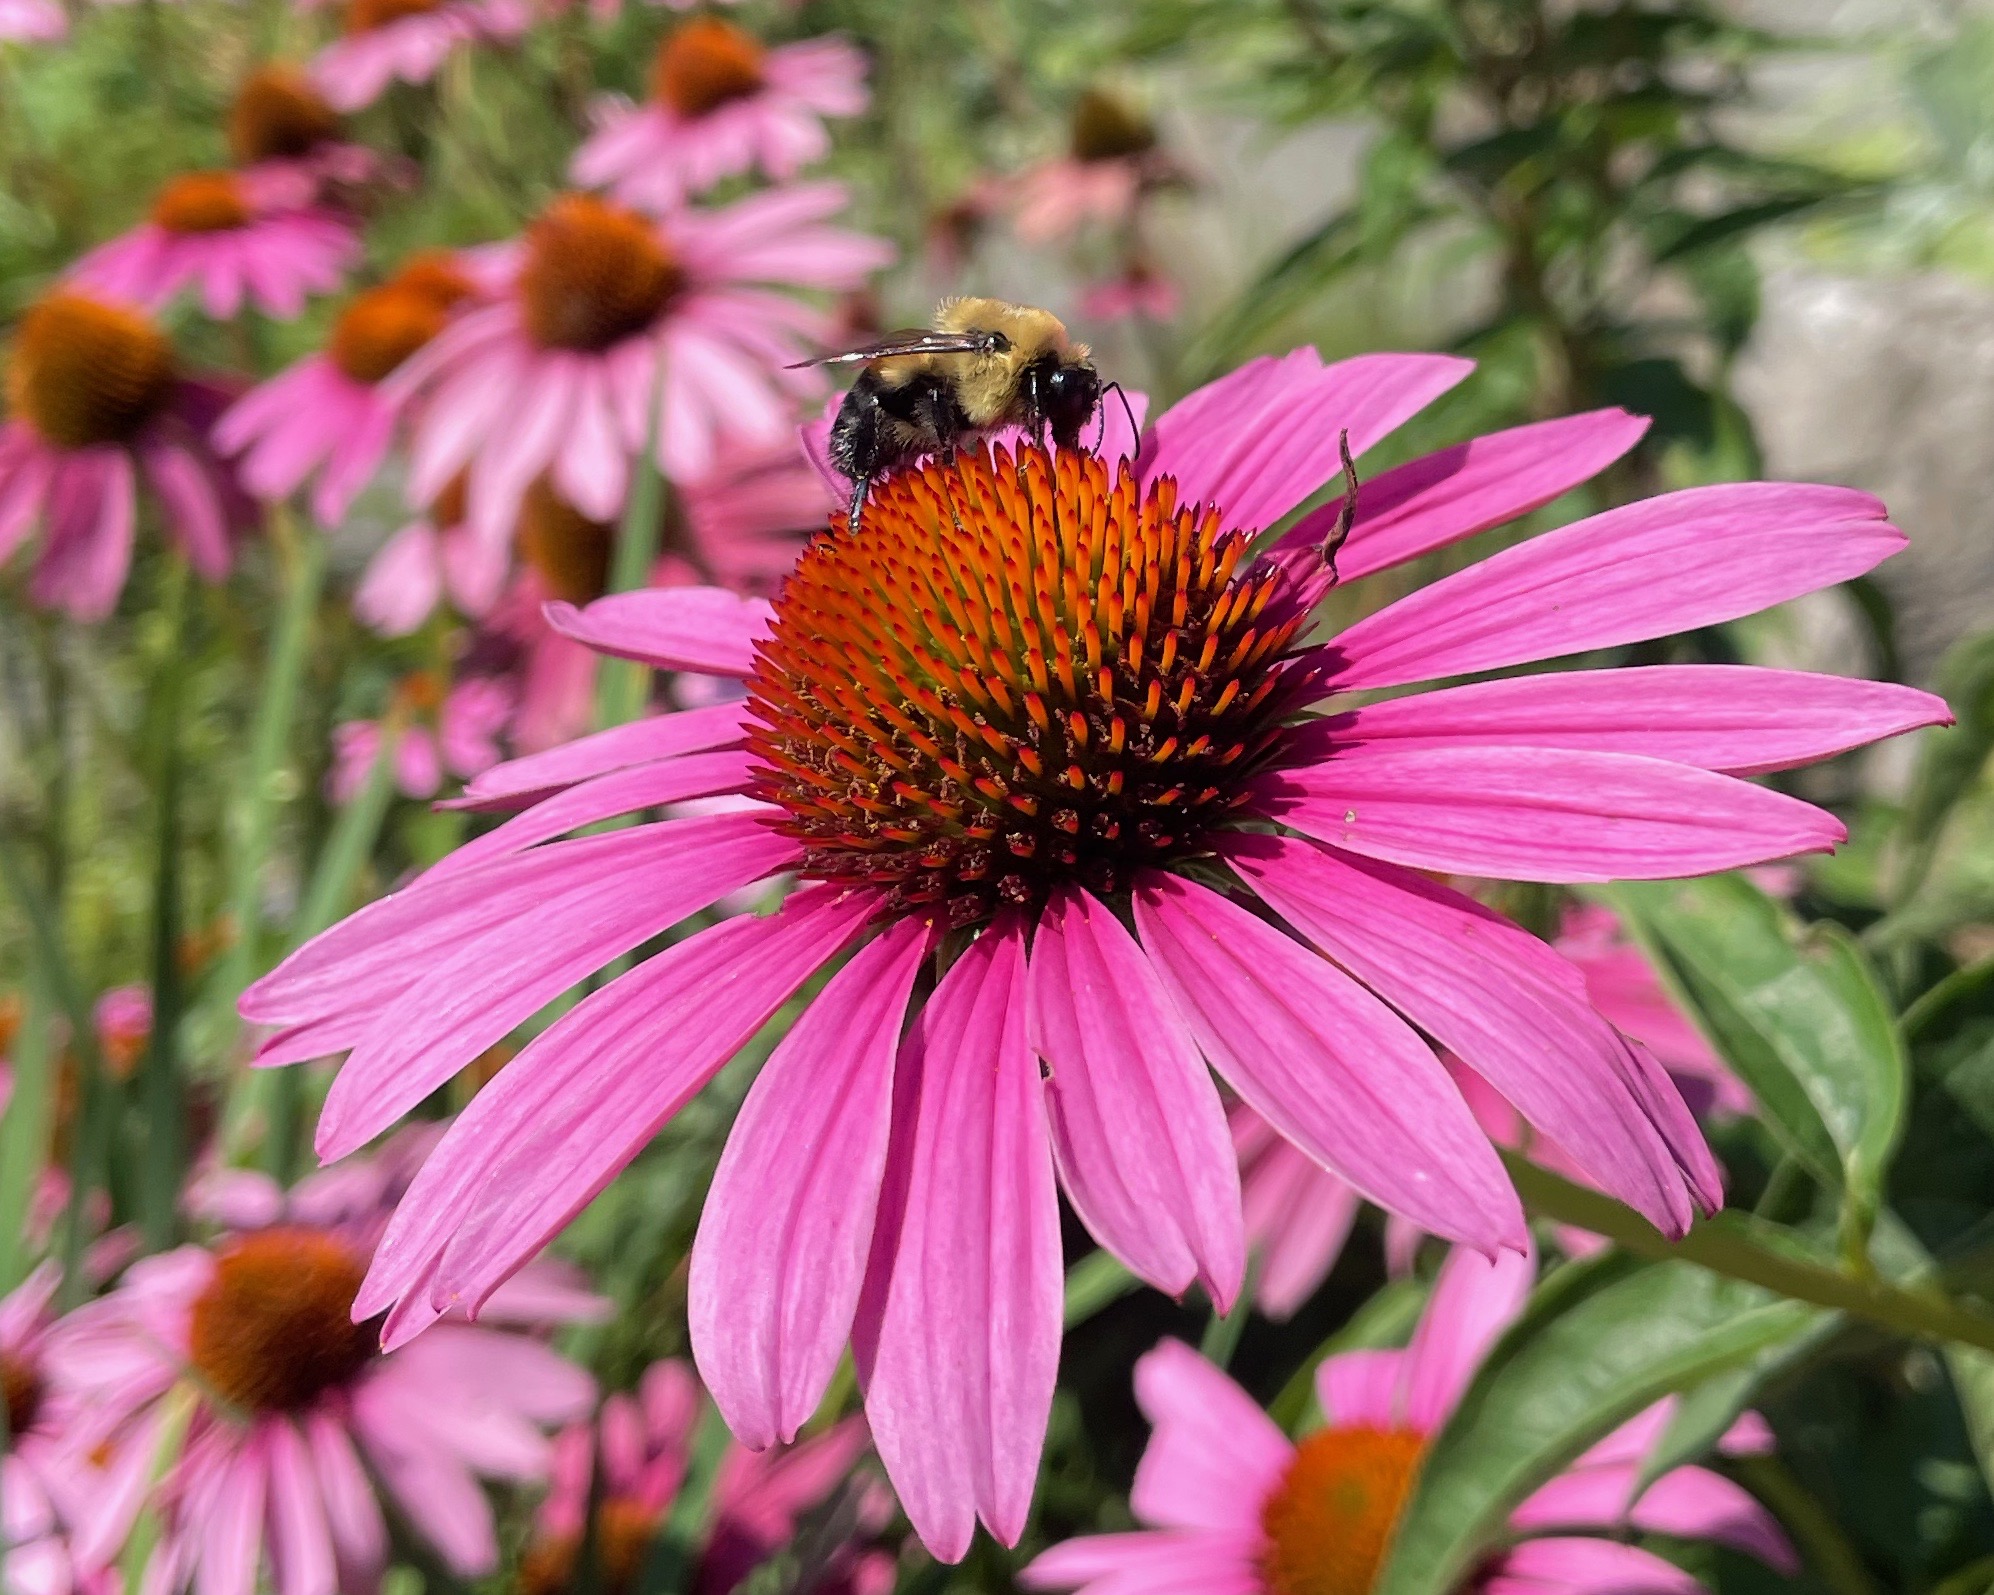 A bumblebee perches on a bright pink flower